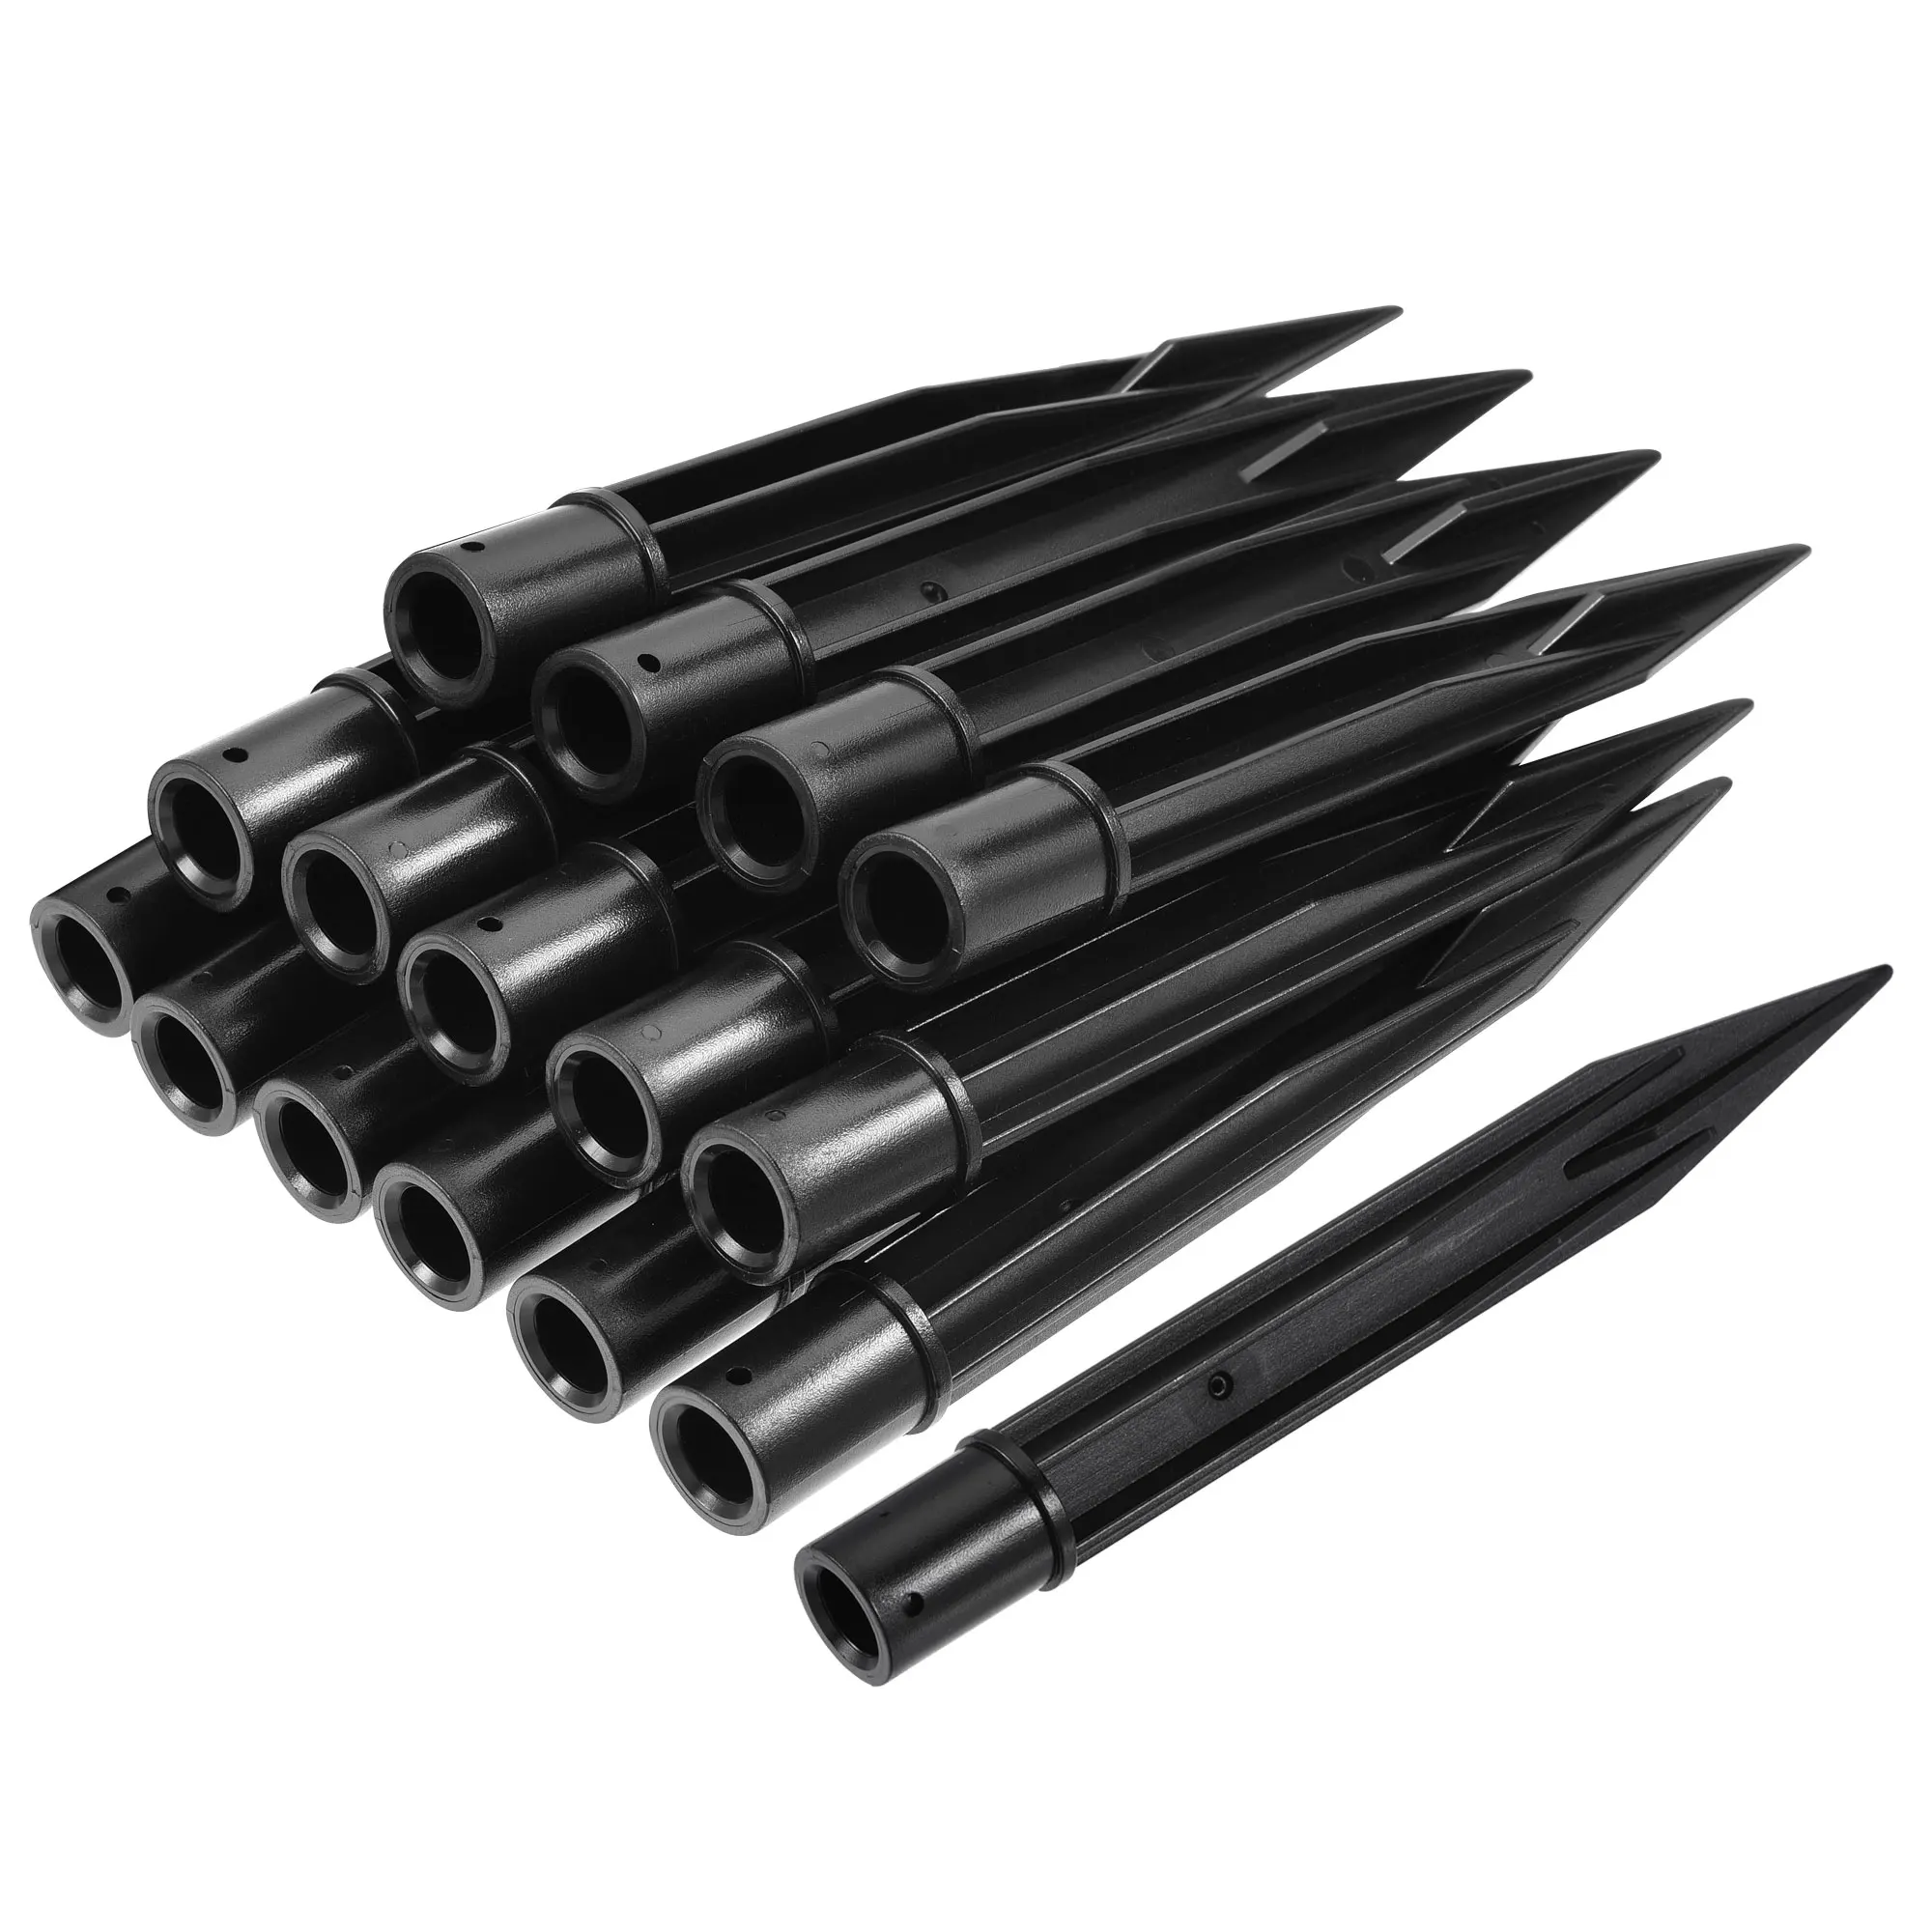 8/12/16Pcs Ground Spike 10x17x150mm Solar Light Spikes ABS Plastic Black Spikes Ground Stakes for Garden Pathway Landscape Lamps